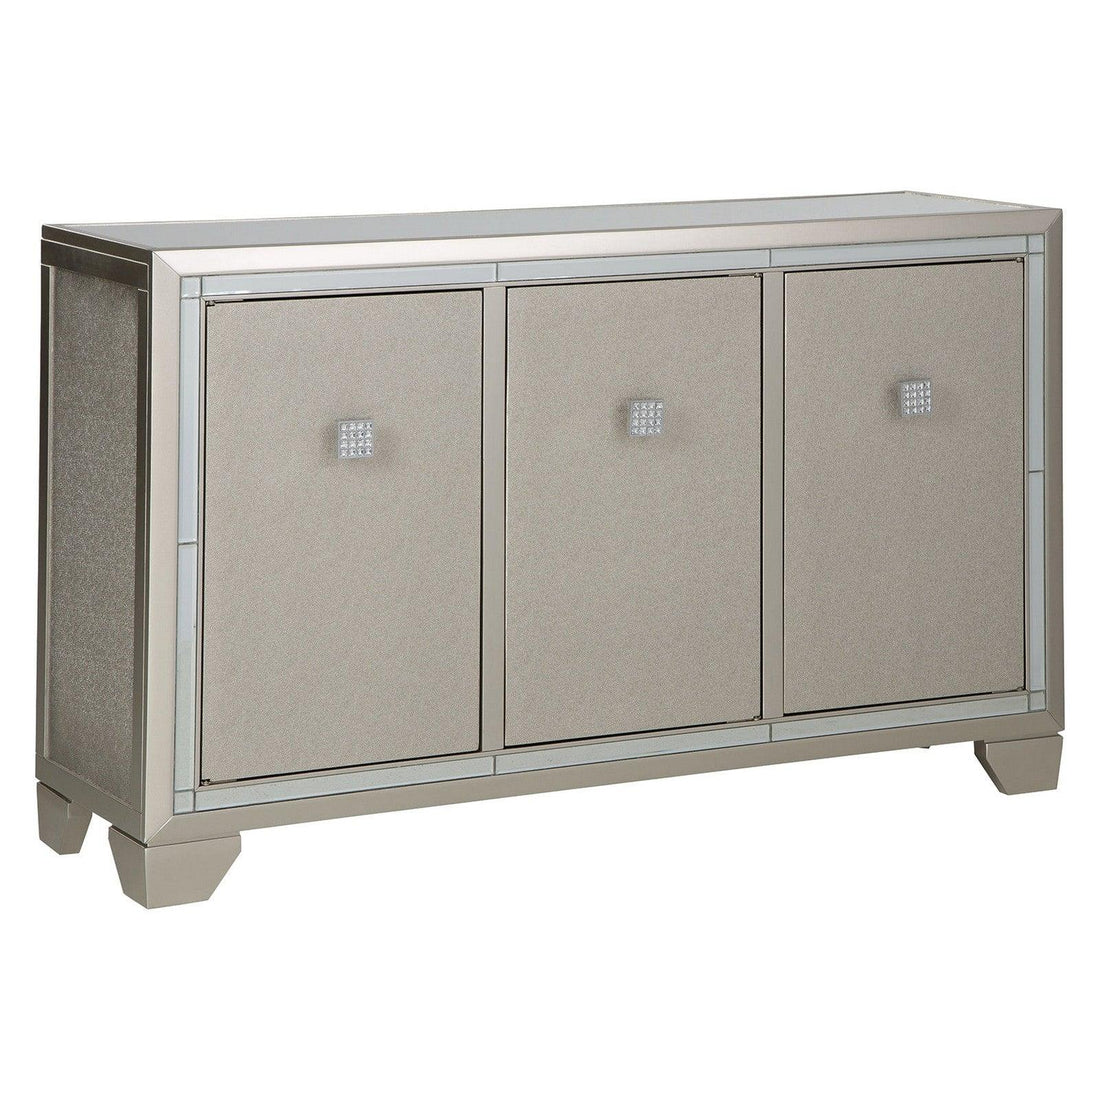 Chaseton Accent Cabinet Ash-A4000335